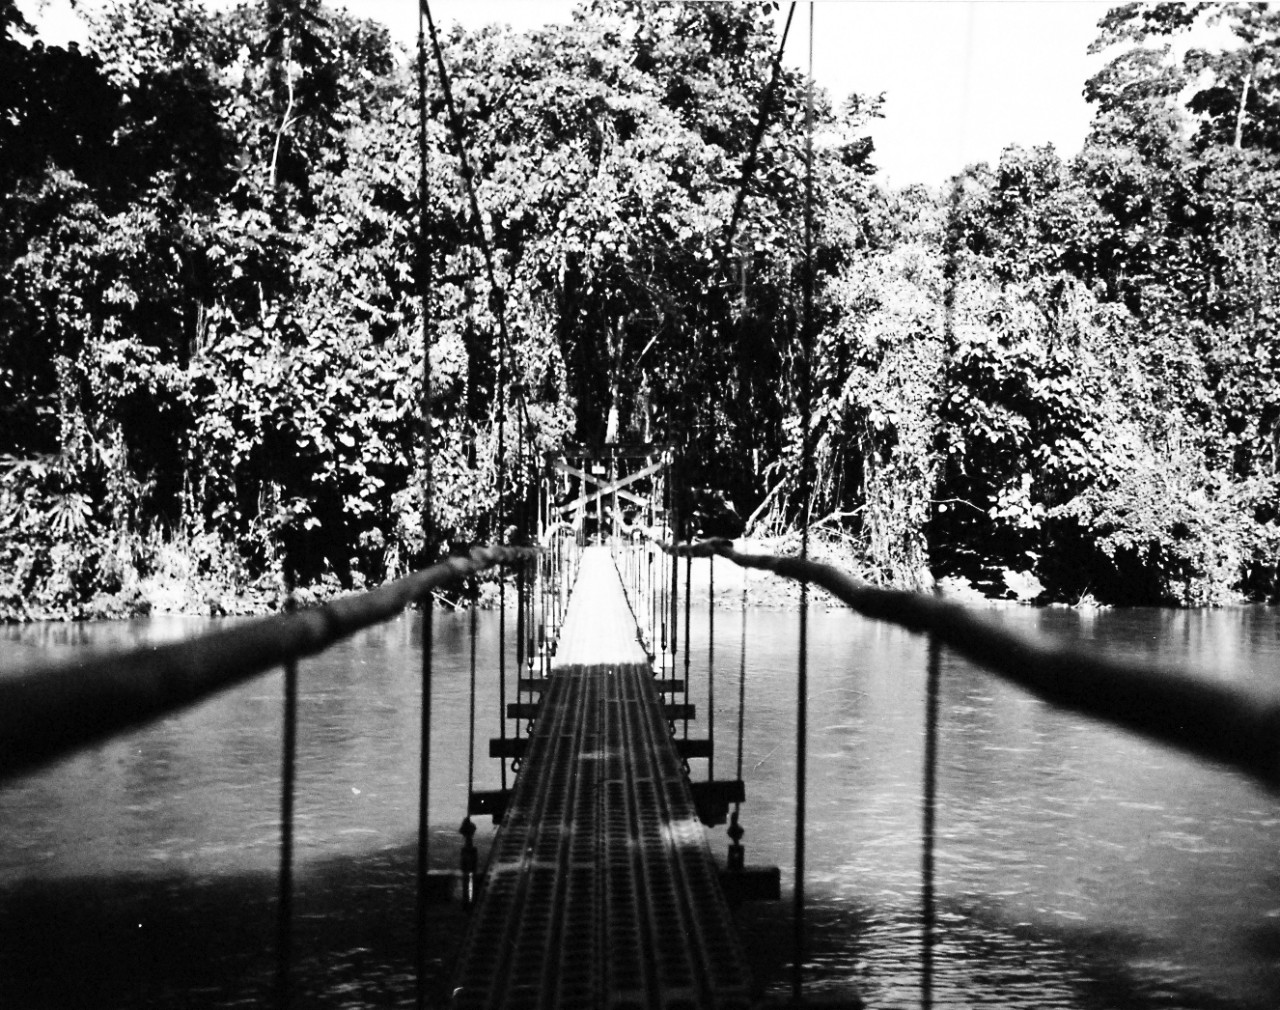 <p>80-G-44225:&nbsp; Guadalcanal Campaign, August 1942-February 1943.&nbsp; Seabees cross their bridges.&nbsp; This bridge over a river on Guadalcanal was erected in a day and a half.&nbsp; Flooring is pierced plank, handrails are of native bamboo, and he towers were bents from a portable military engineer bridge.&nbsp; Photograph received March 2, 1944.&nbsp; &nbsp;</p>
